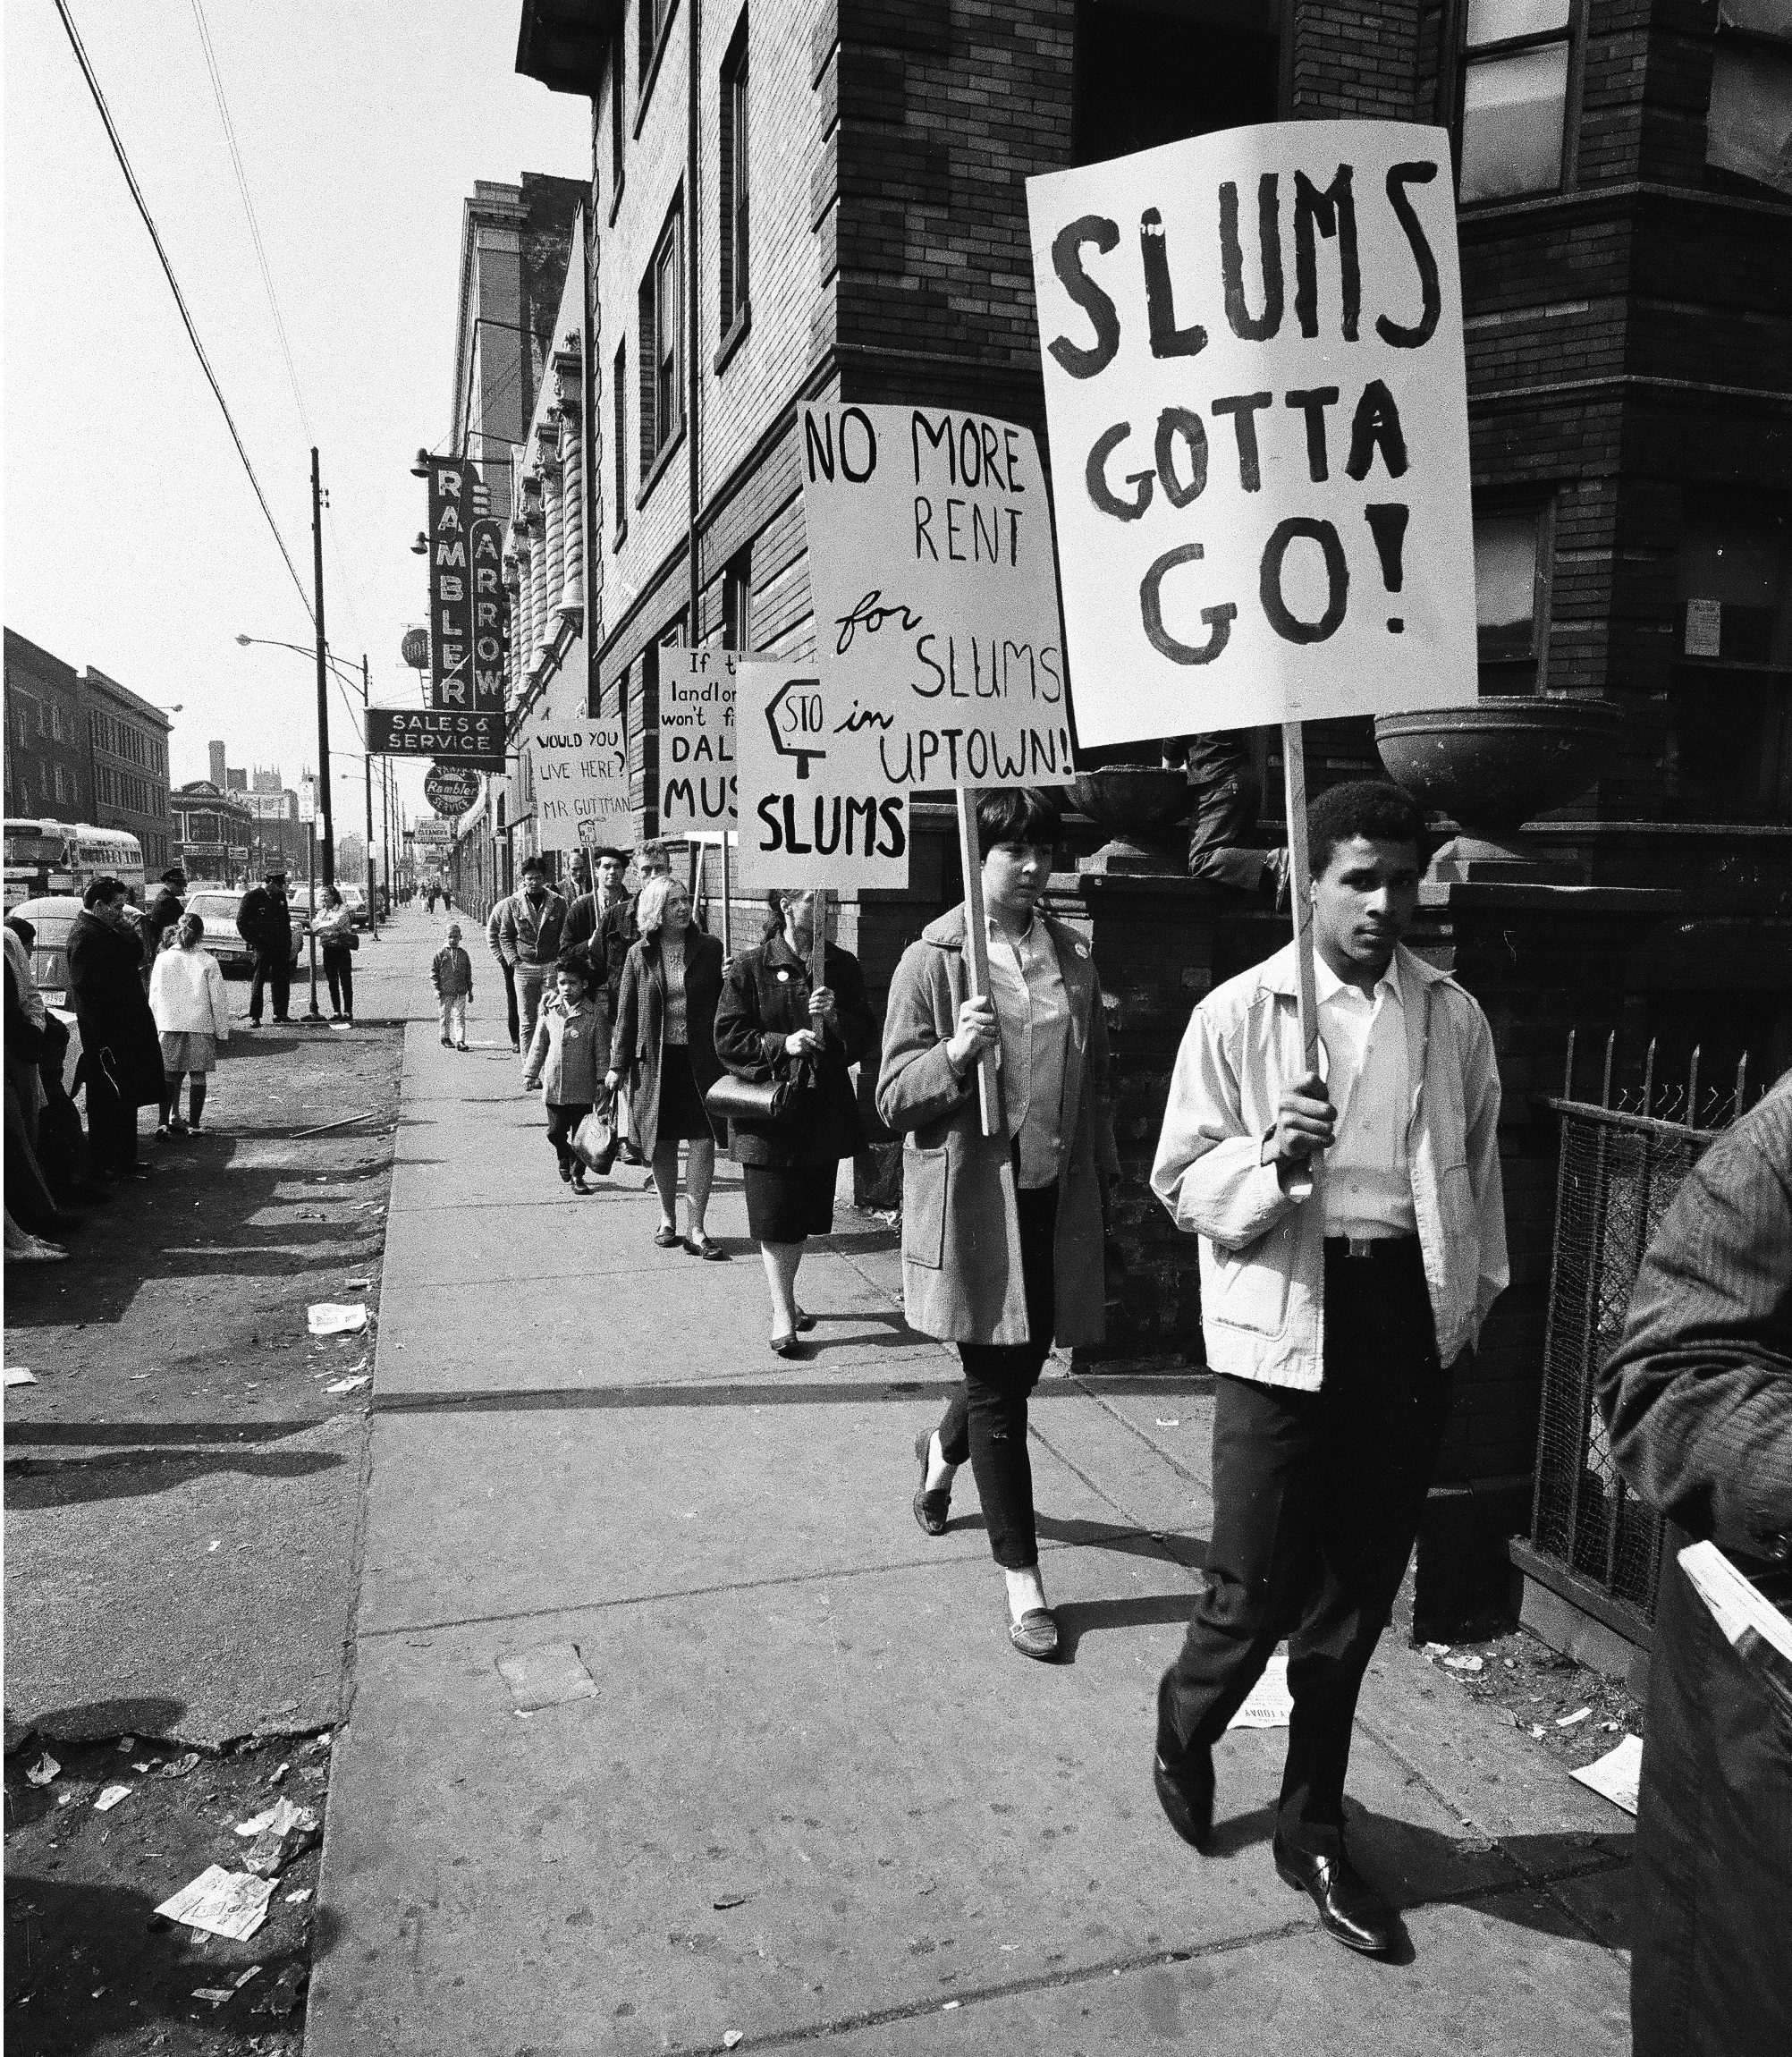 Protestors walk along a sidewalk holding rent strike signs, Chicago, September 30, 1966. ST-40000567-0024, Chicago Sun-Times collection, CHM